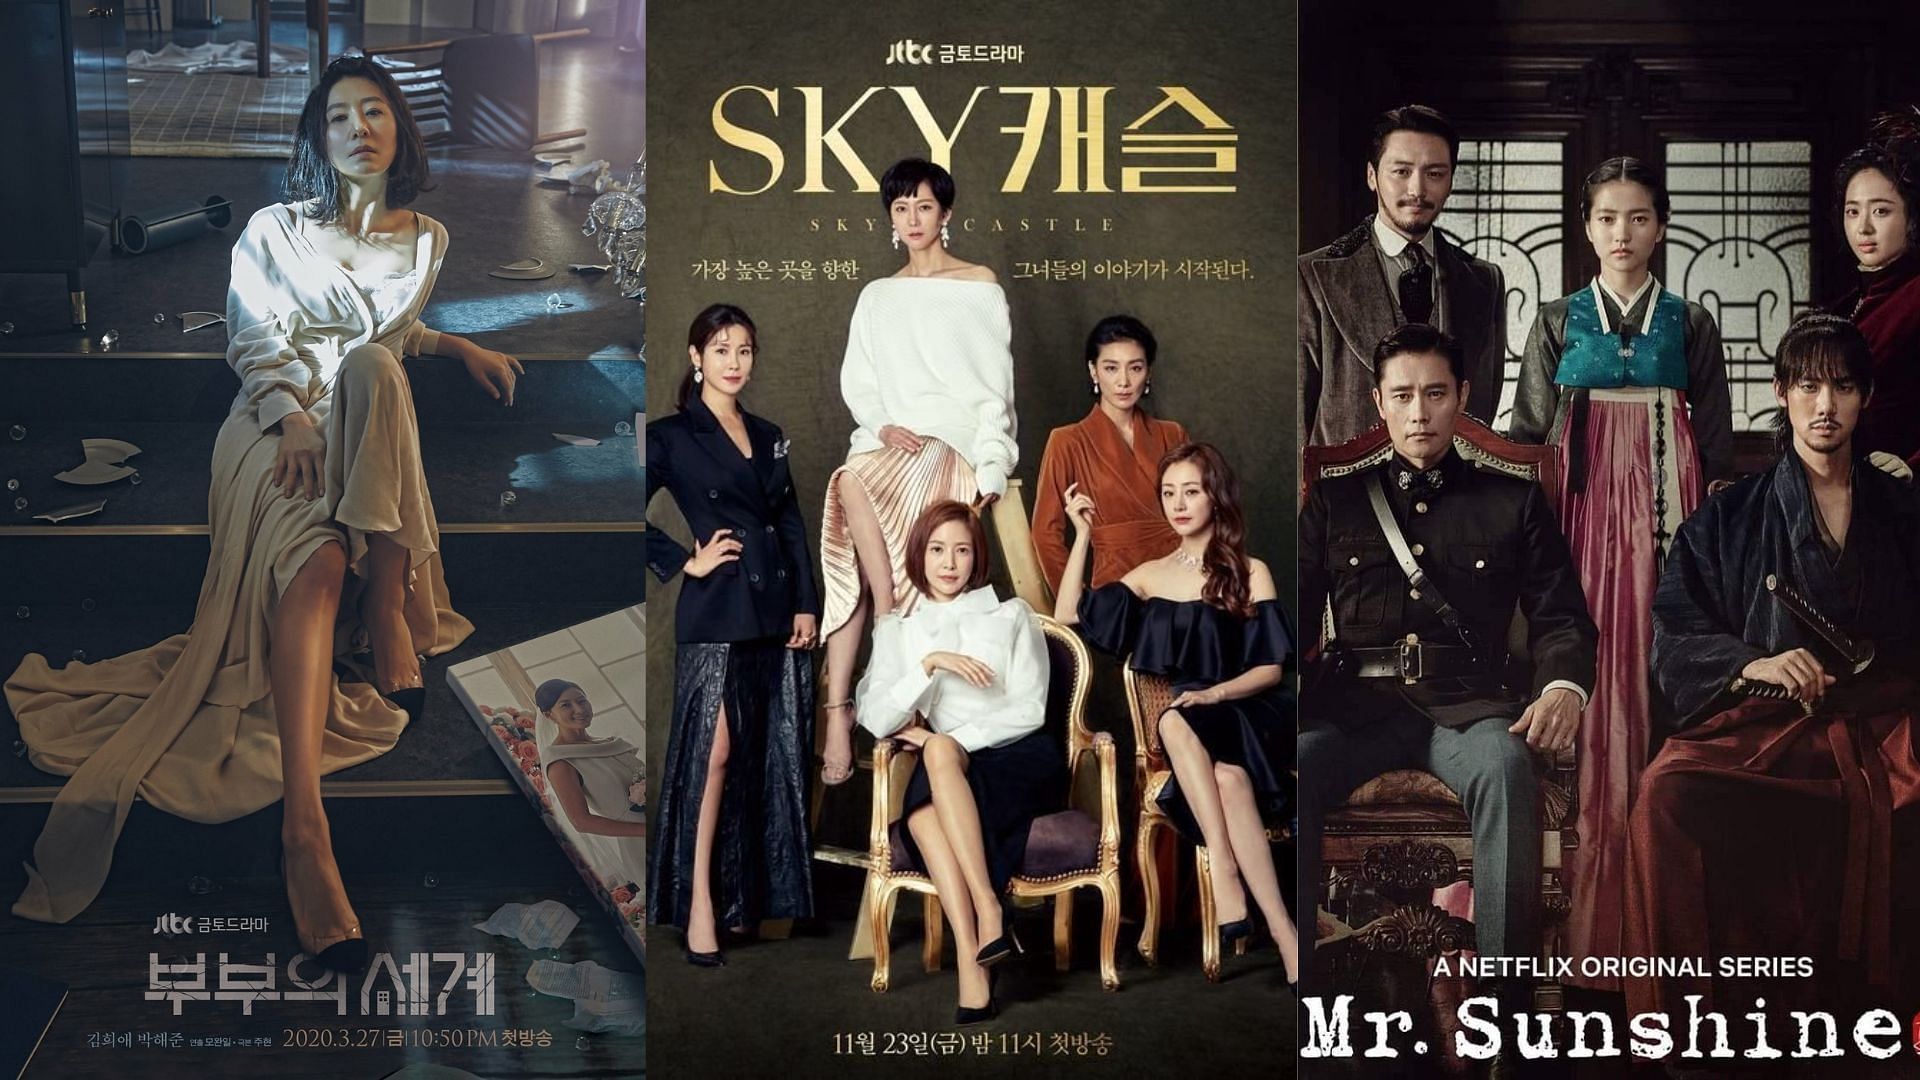 The World of the Married, SKY Castle, and Mr. Sunshine official posters (Images via JTBC and Netflix)